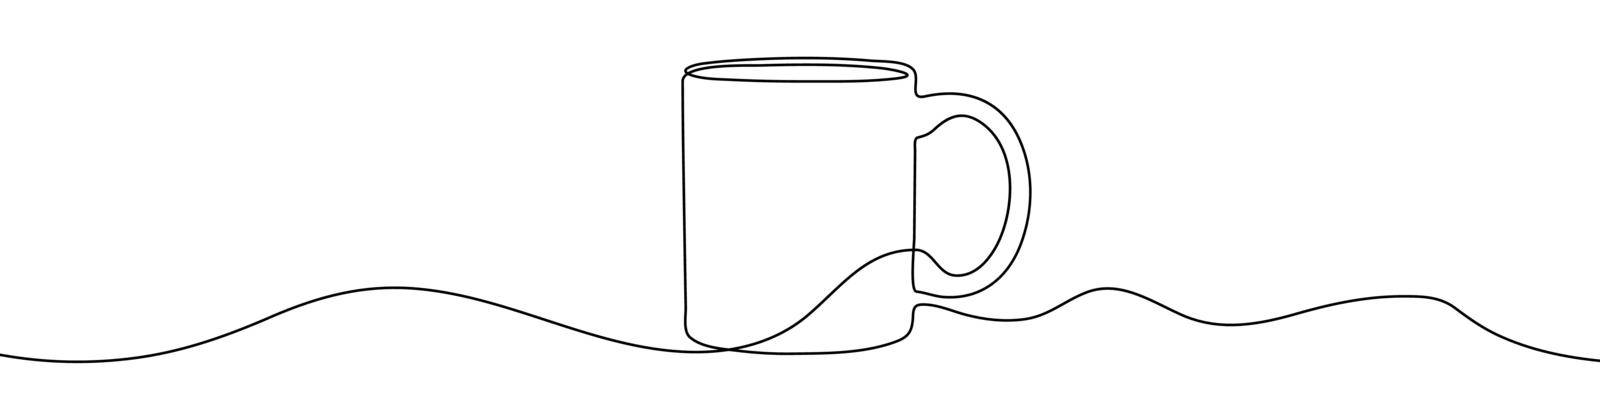 Continuous line drawing of cup. The mug one line icon. One line drawing background. by Chekman